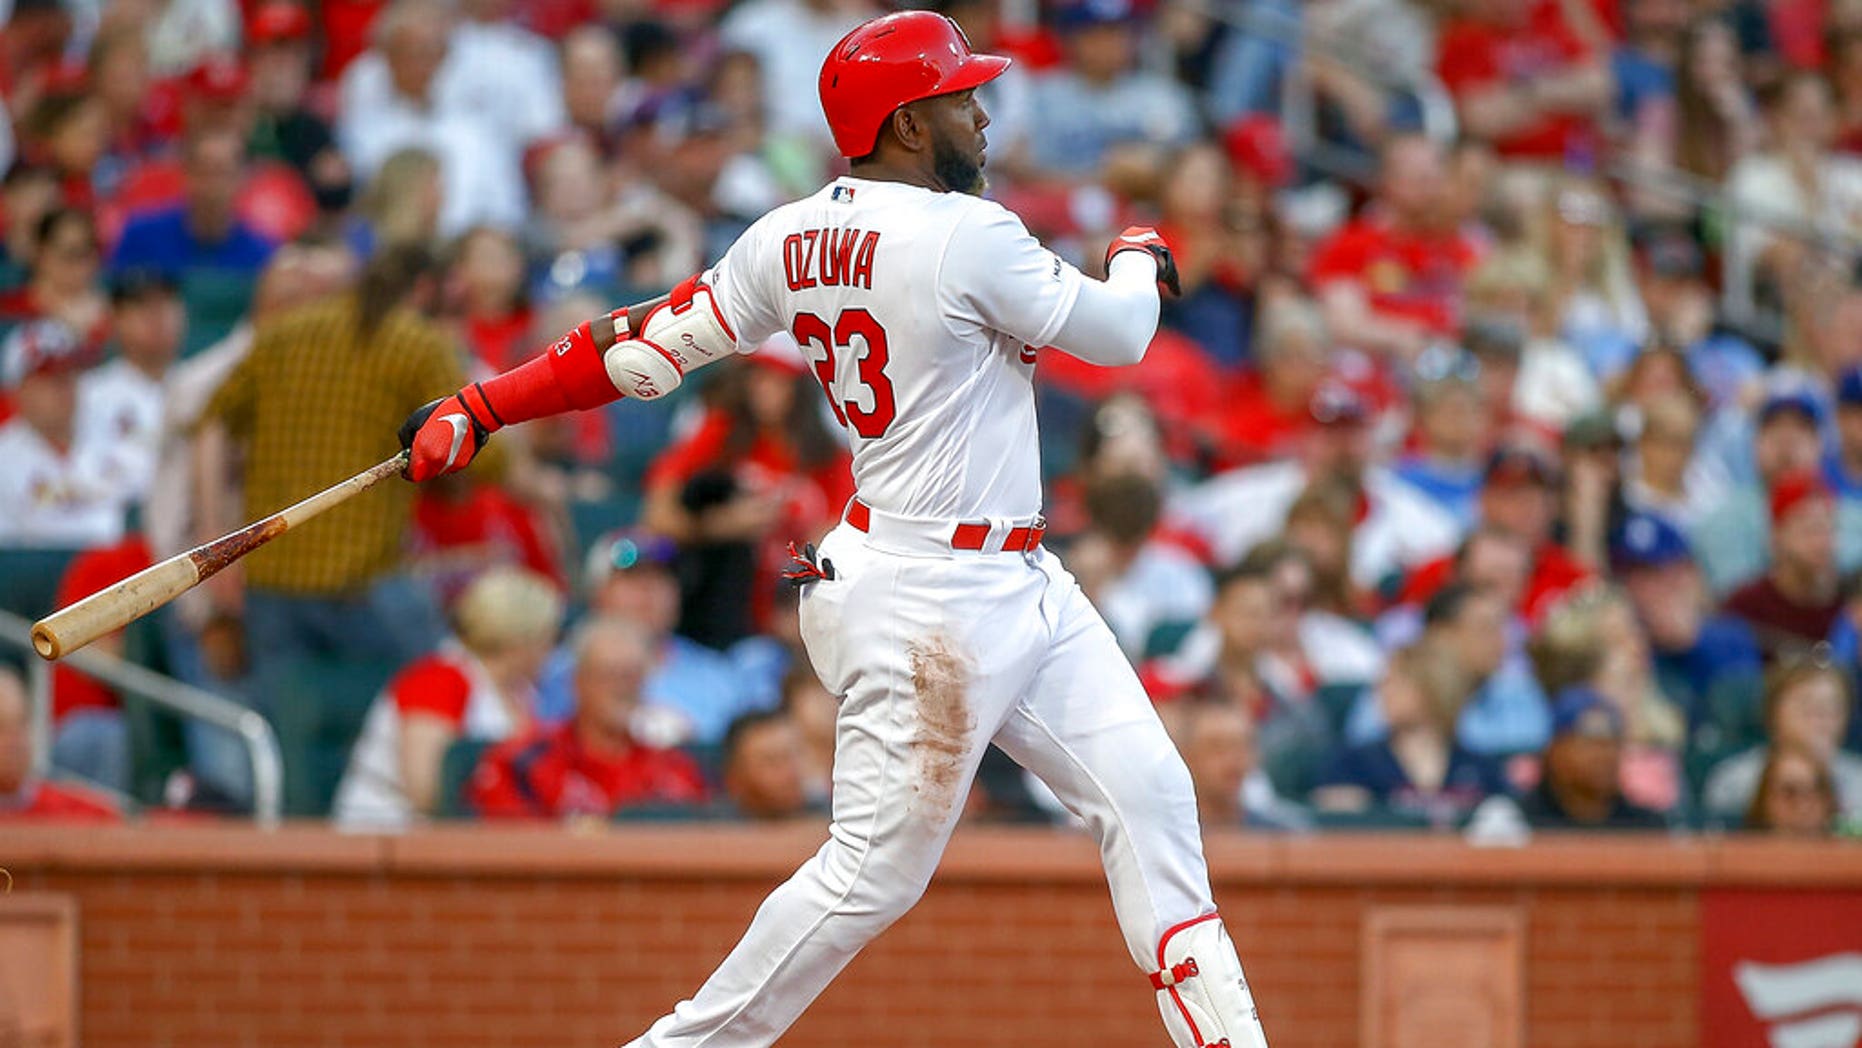 St. Louis Cardinals’ Marcell Ozuna face plants after overestimating fly ball – Hot Prime NEWS